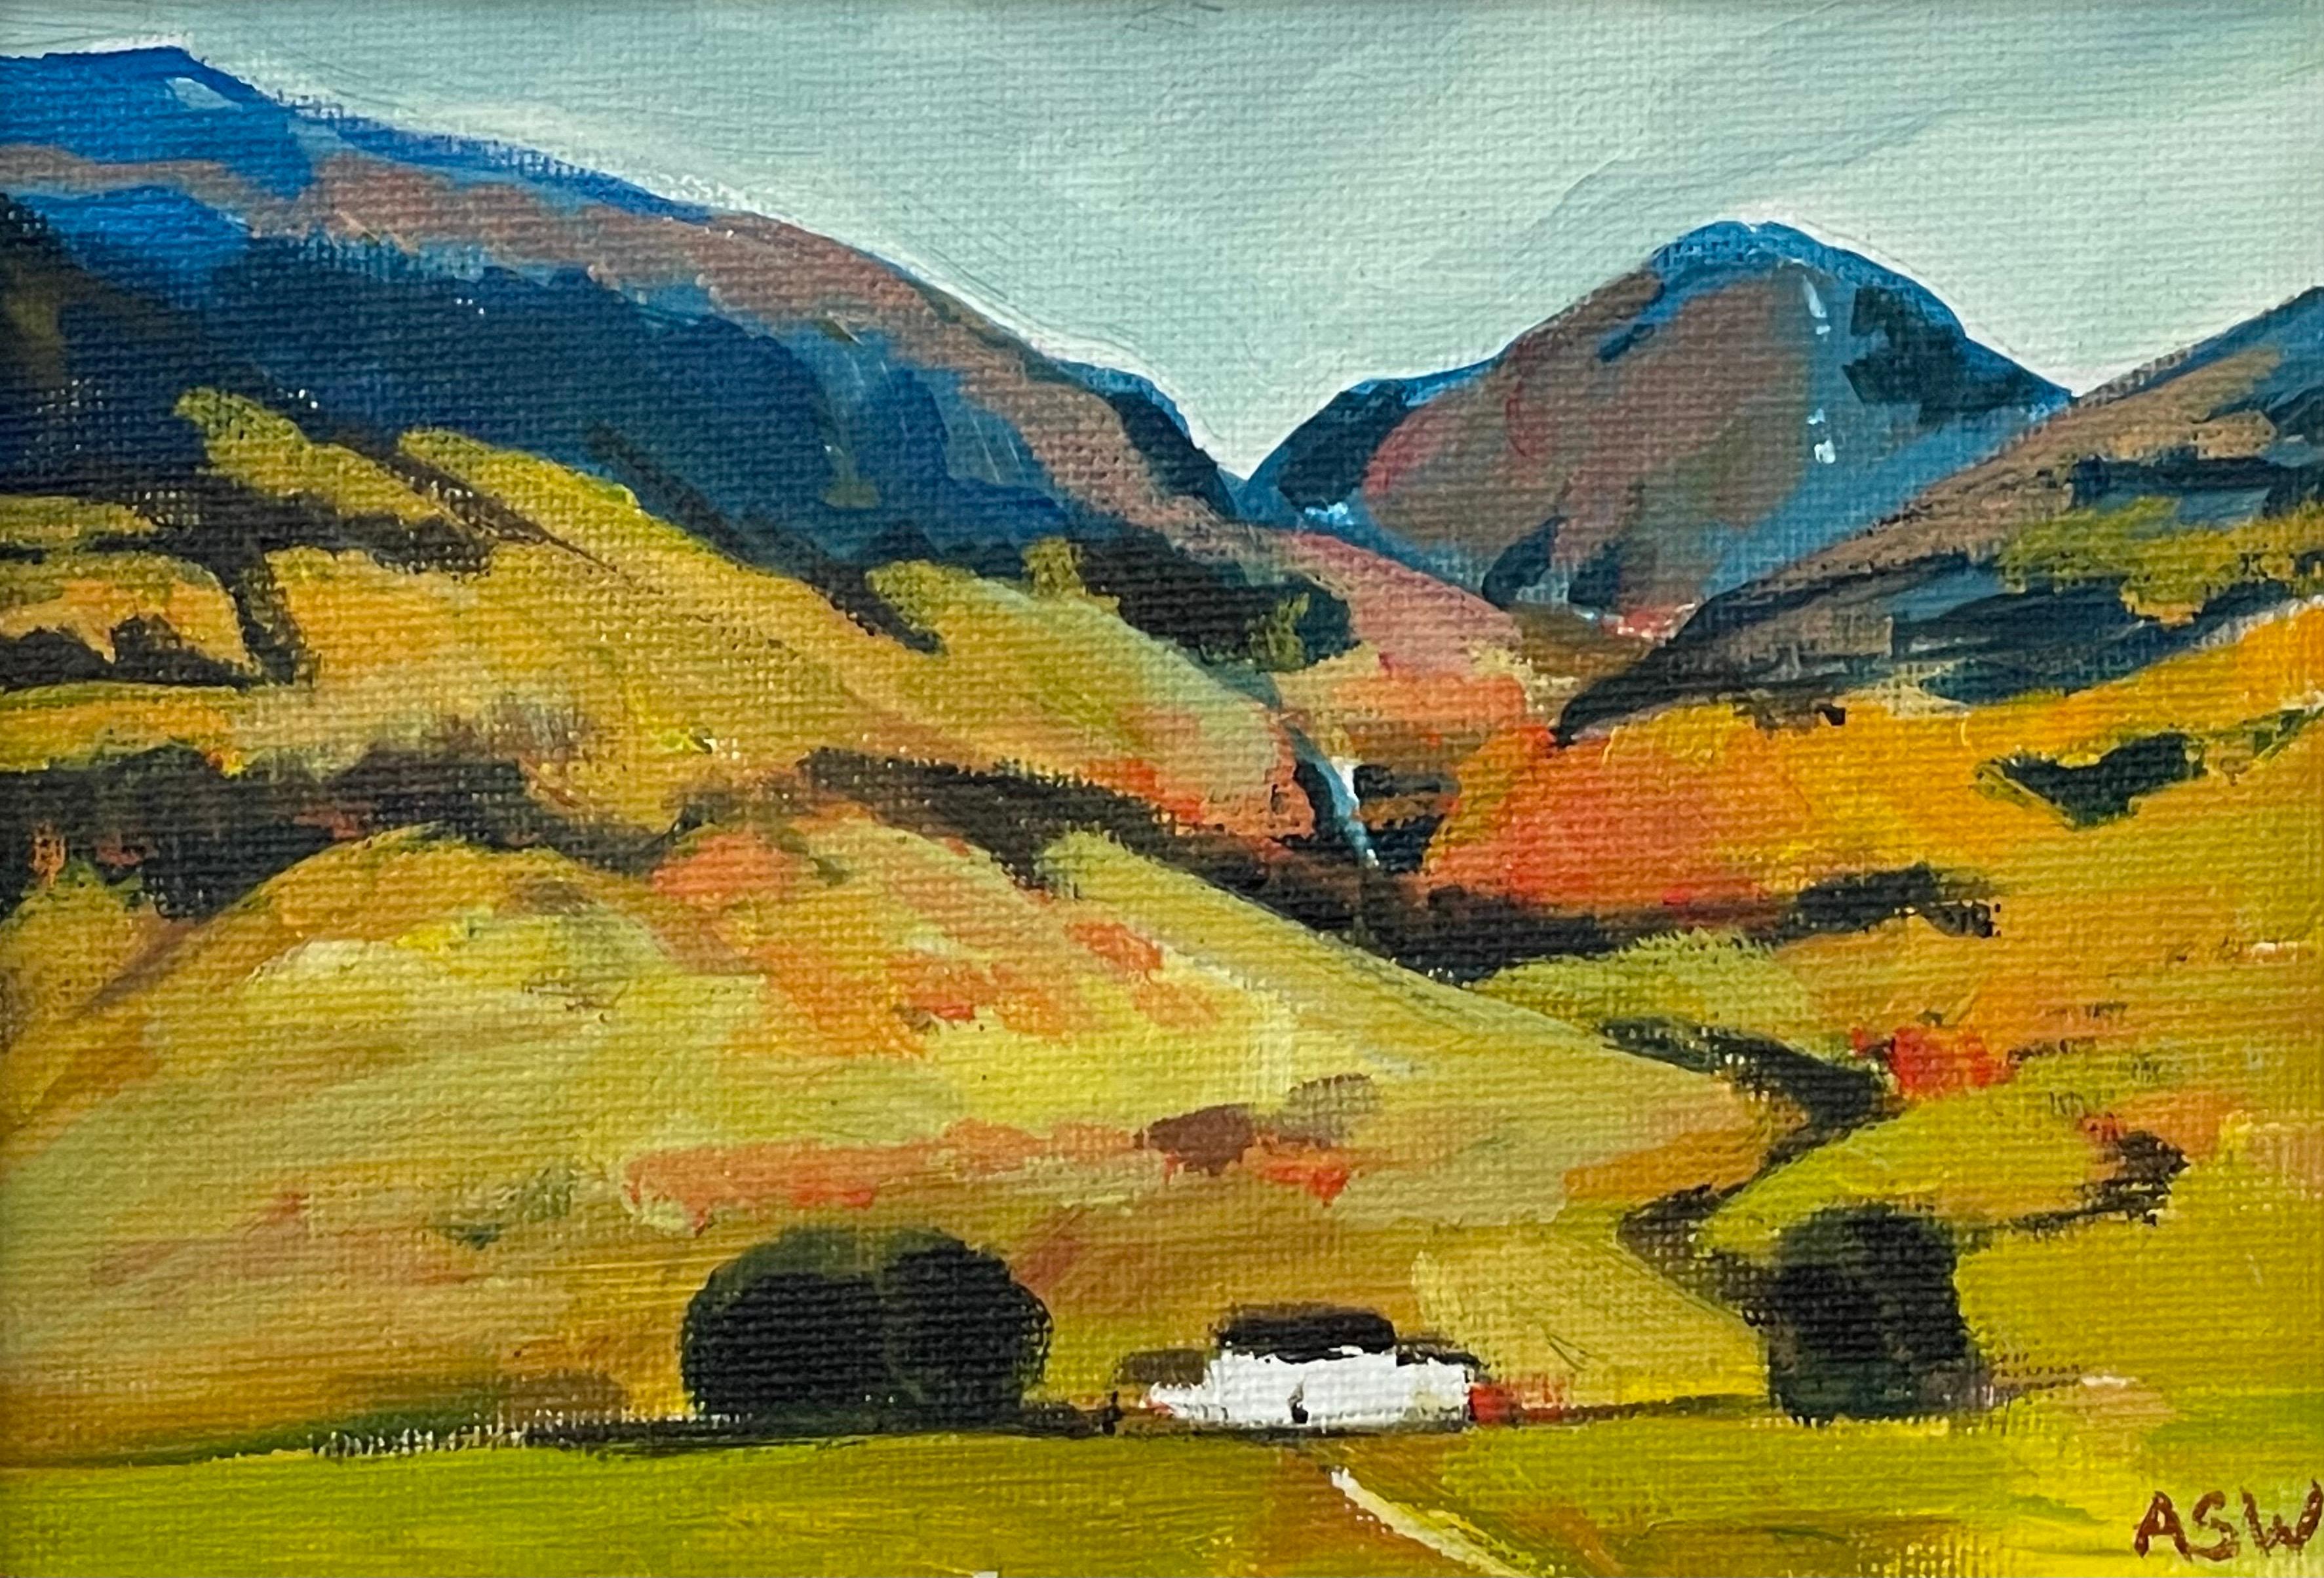 Miniature Landscape Study of the Scottish Highlands by Contemporary British Artist Angela Wakefield

Art measures 6 x 4 inches
Frame measures 12 x 10 inches 

Angela Wakefield has twice been on the front cover of ‘Art of England’ and featured in